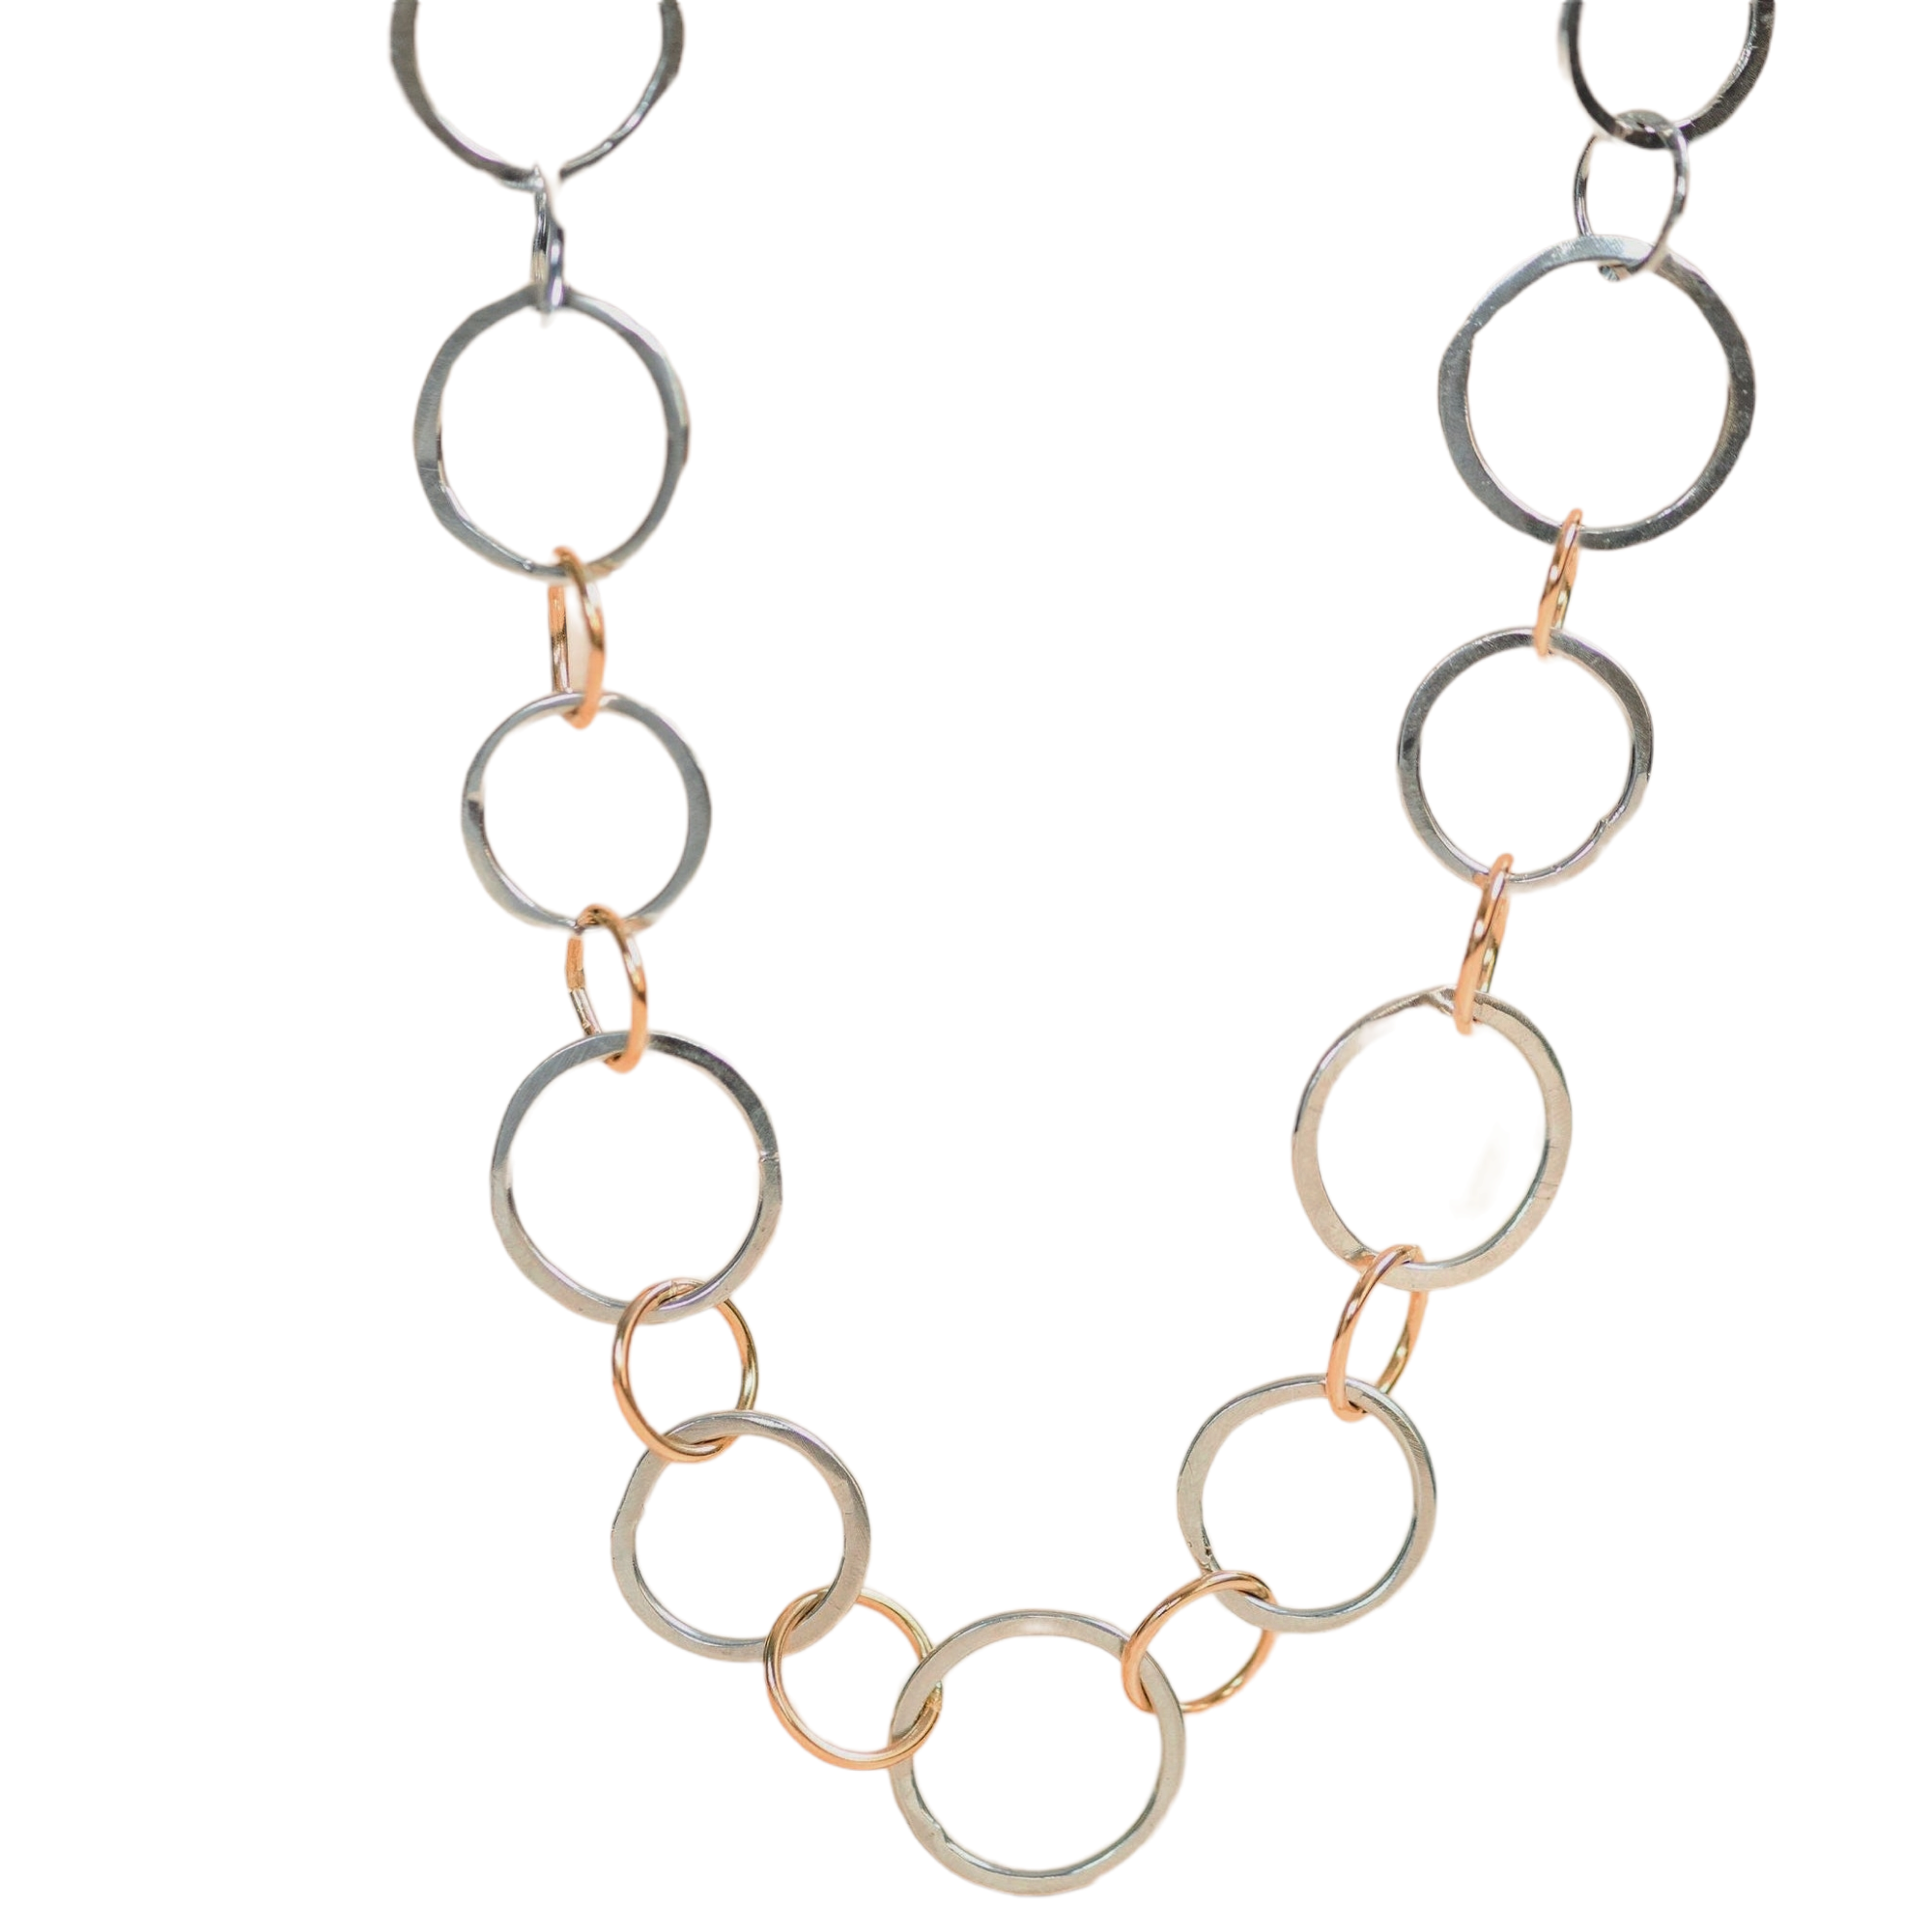 Cara Sterling Silver & 14K Chain Link  Necklace